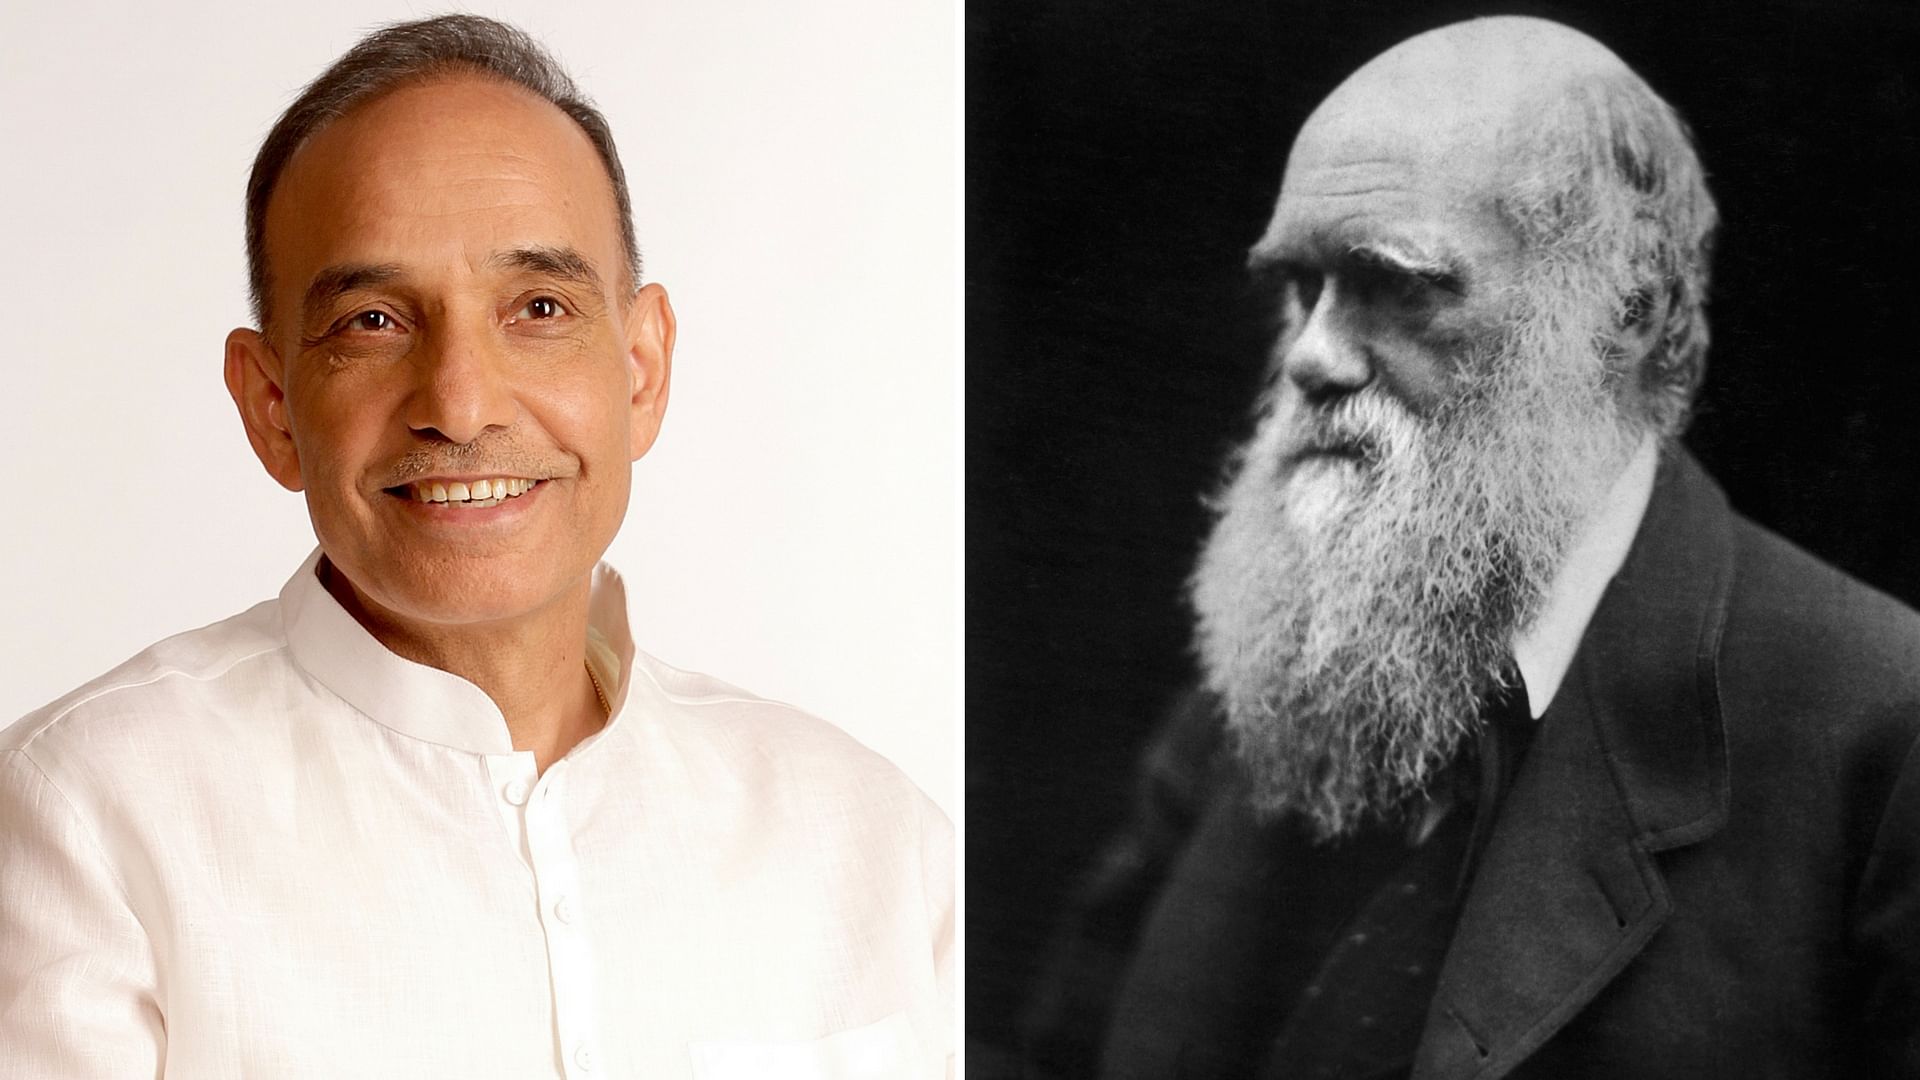 Union minister Satyapal Singh has claimed that Charles Darwin’s theory of evolution of man was “scientifically wrong.”